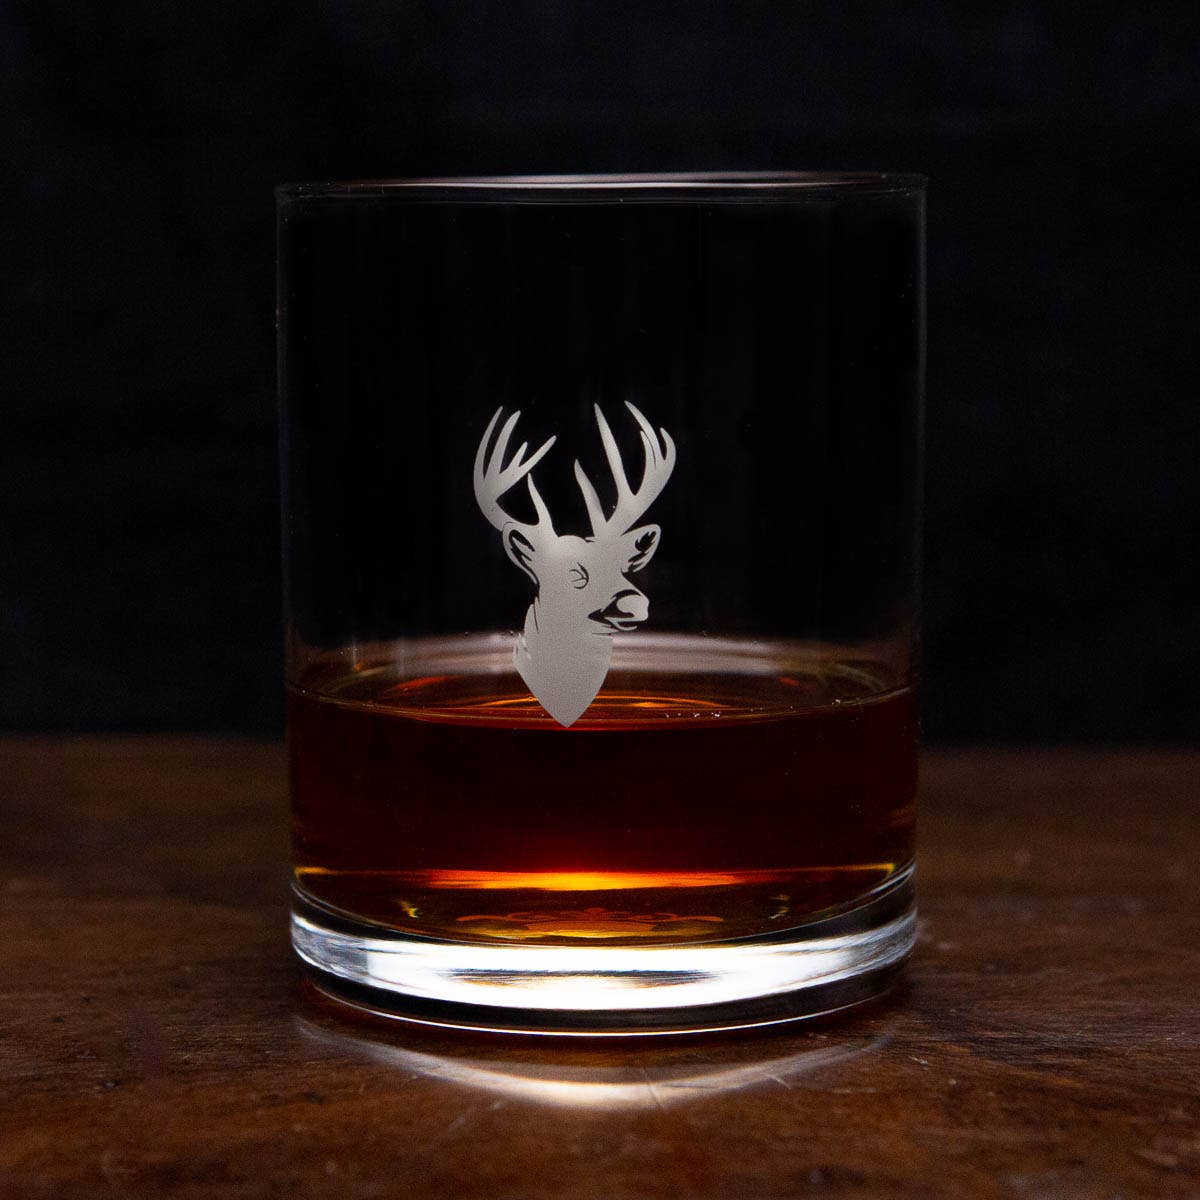 A Deer Rocks Glass Gift Set with a deer head cut out of it from The Royal Standard.